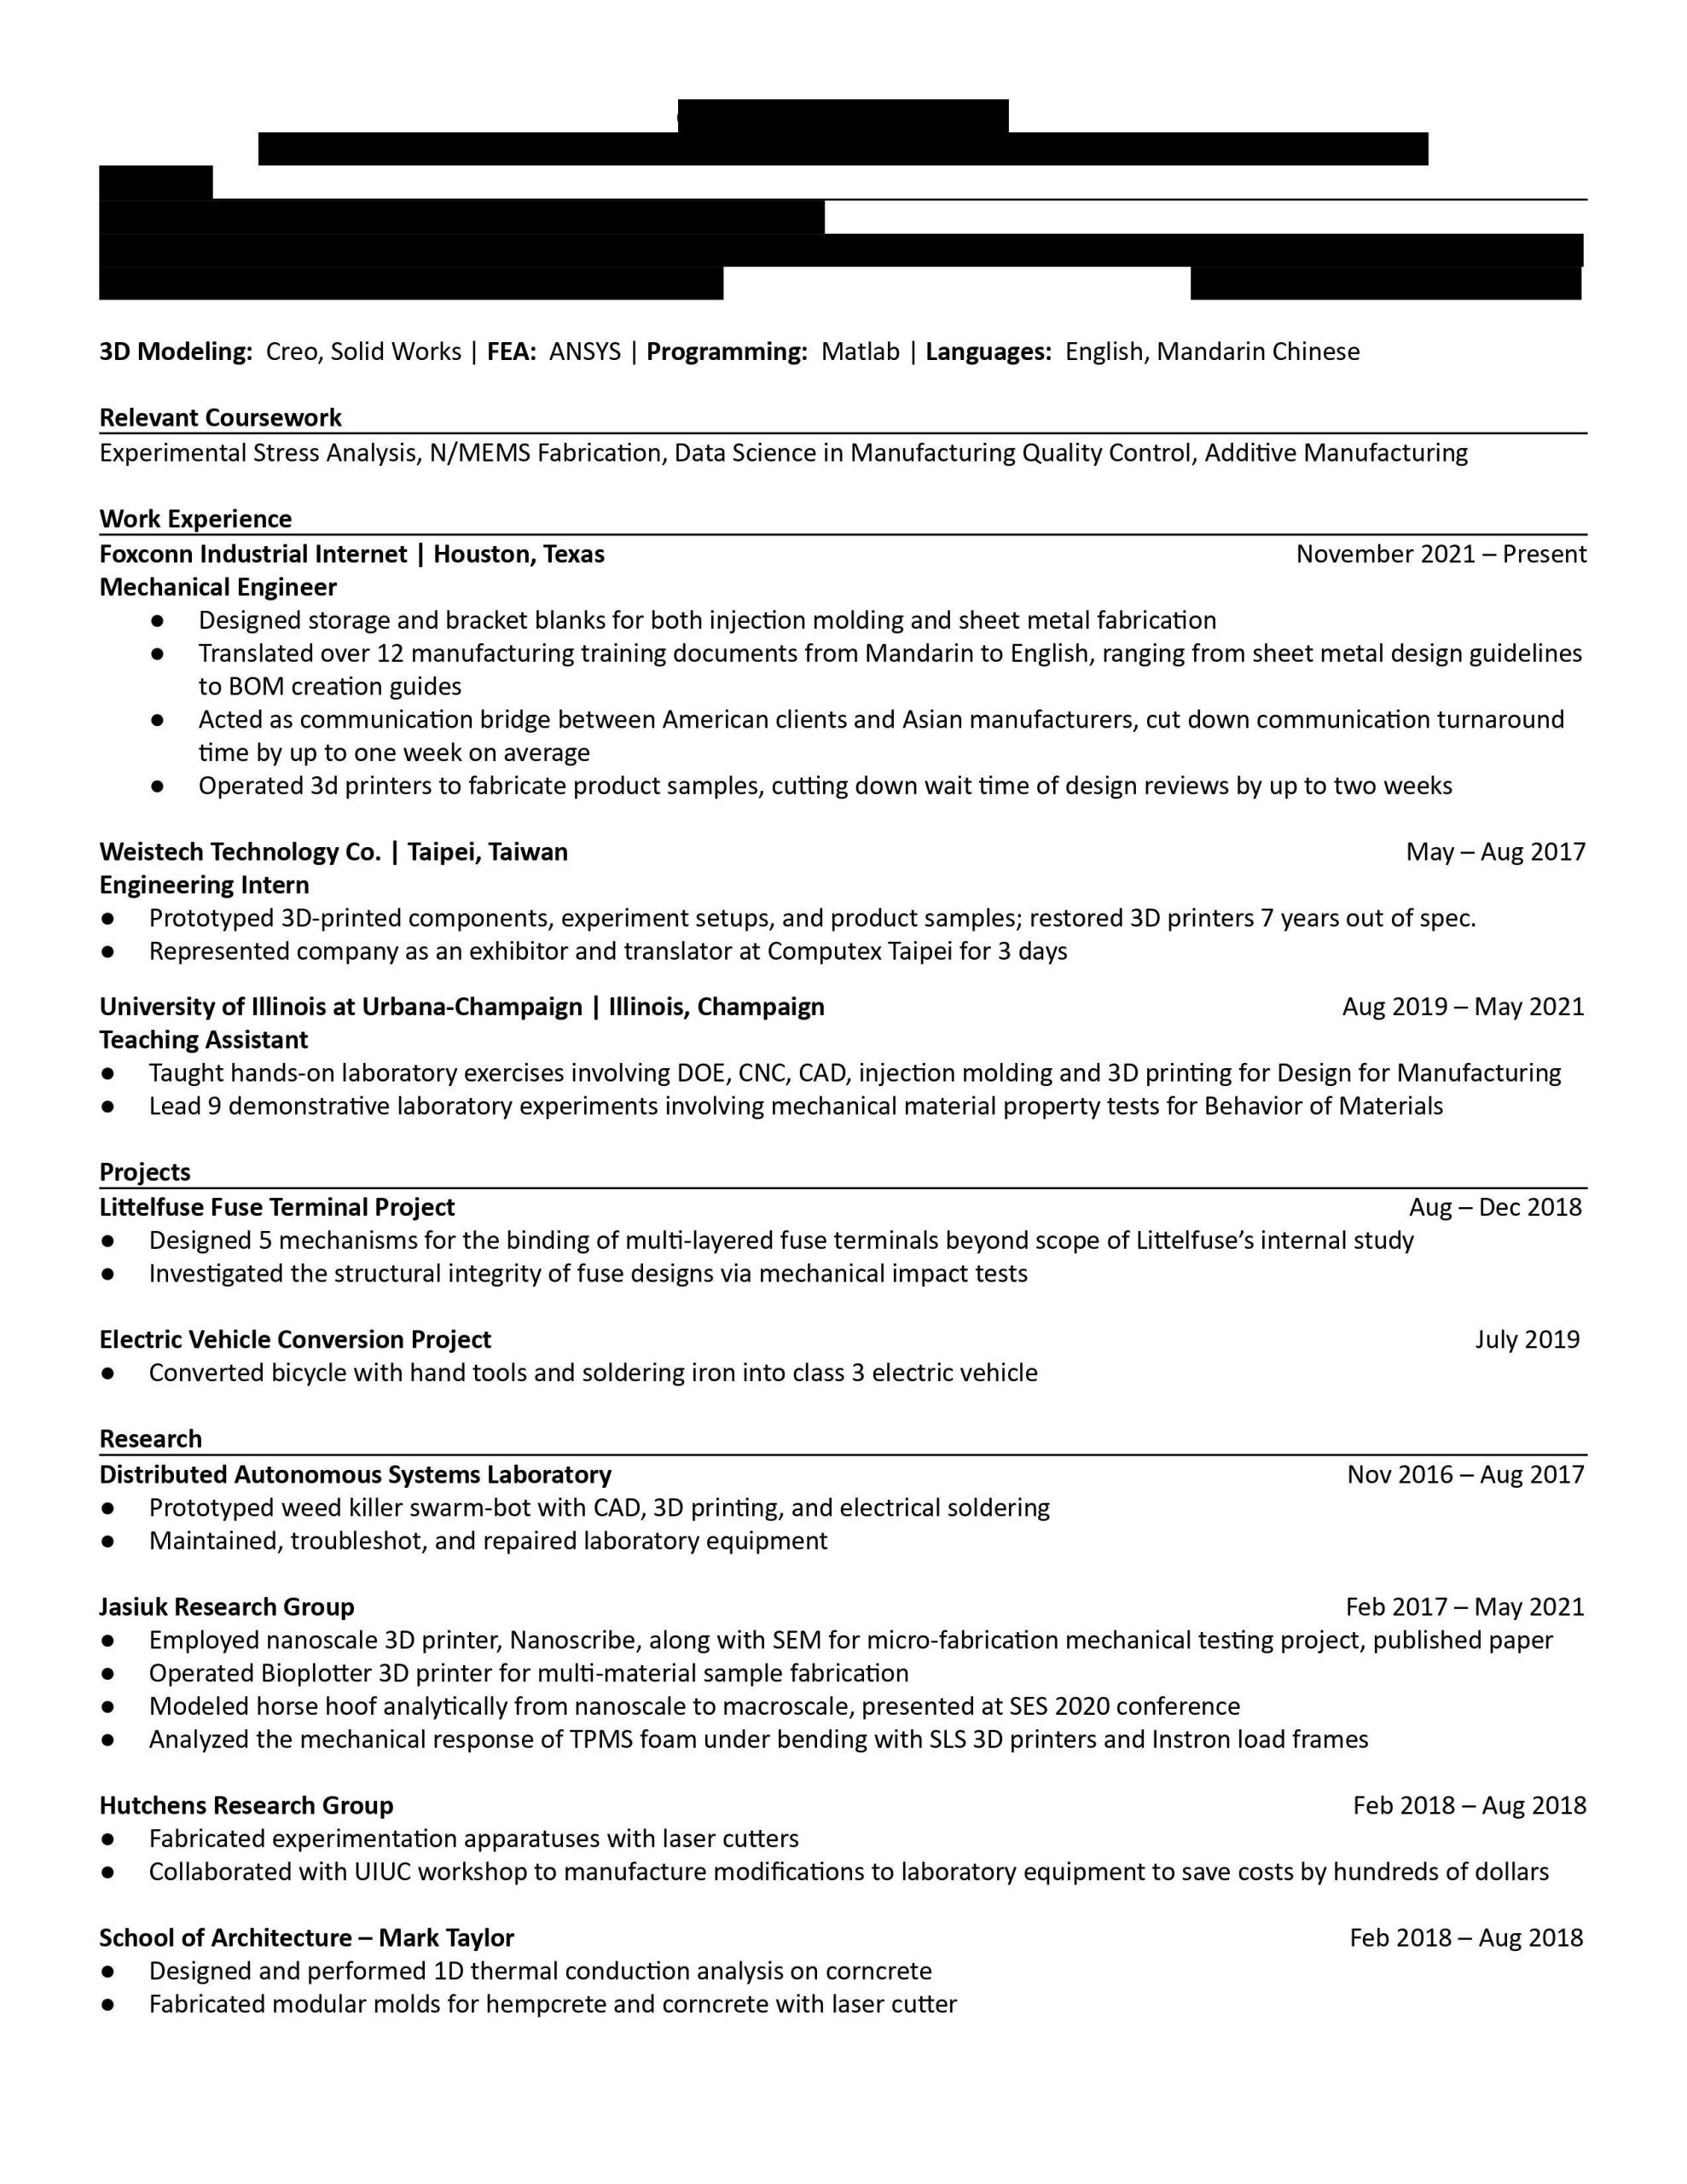 Resume for H1b Application Samples for Computer Science Updating Resume for H1b Filing, Figured Might as Well Do It Right …